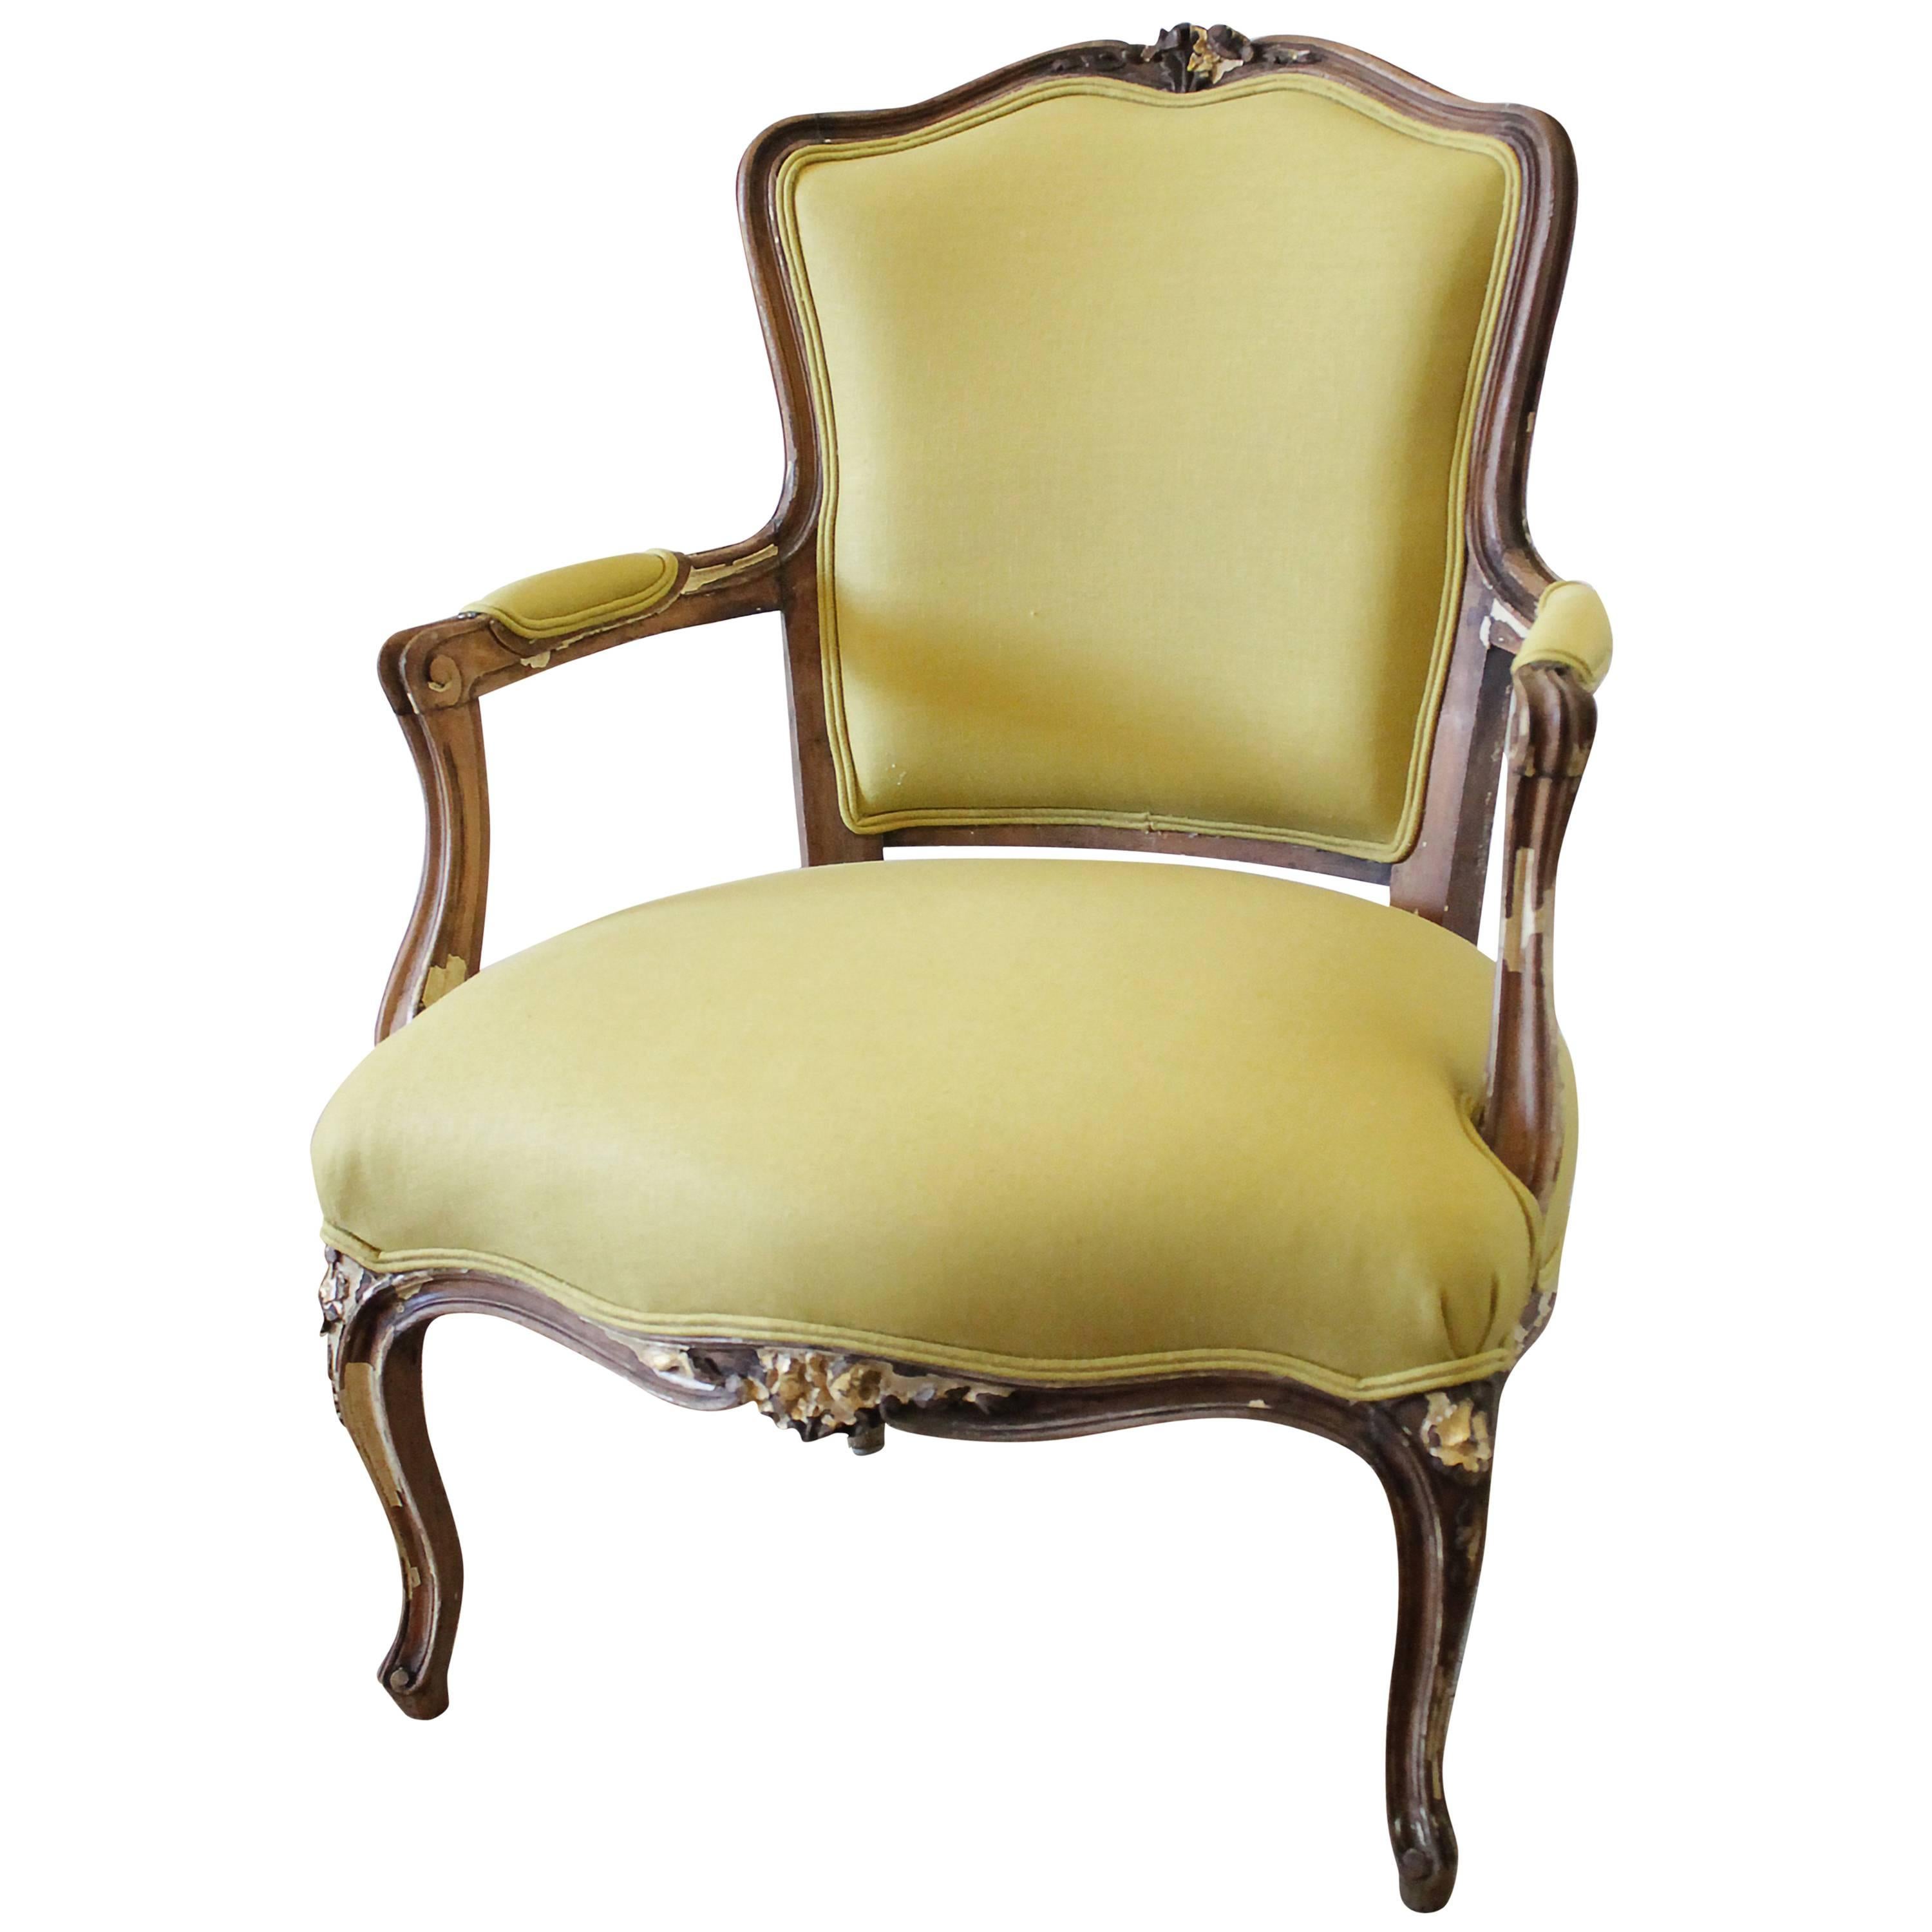 19th Century Louis XV Style Fauteuil in Chartreuse Linen